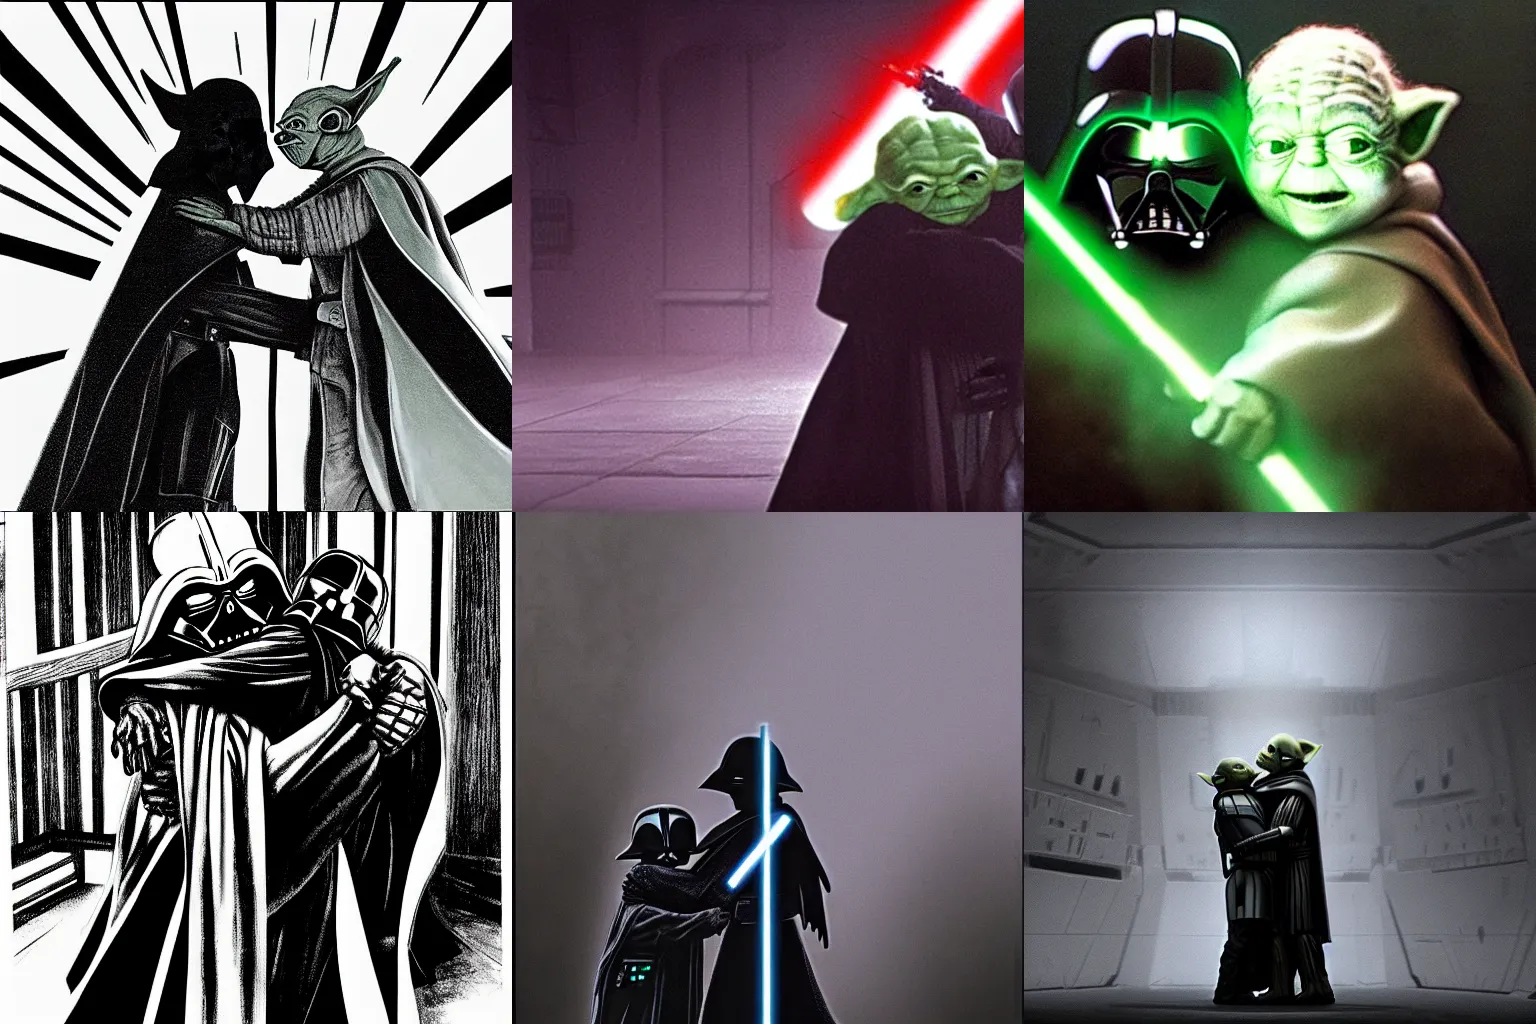 Prompt: Darth vader and yoda hugging each other in a dark room full of stormtroopers